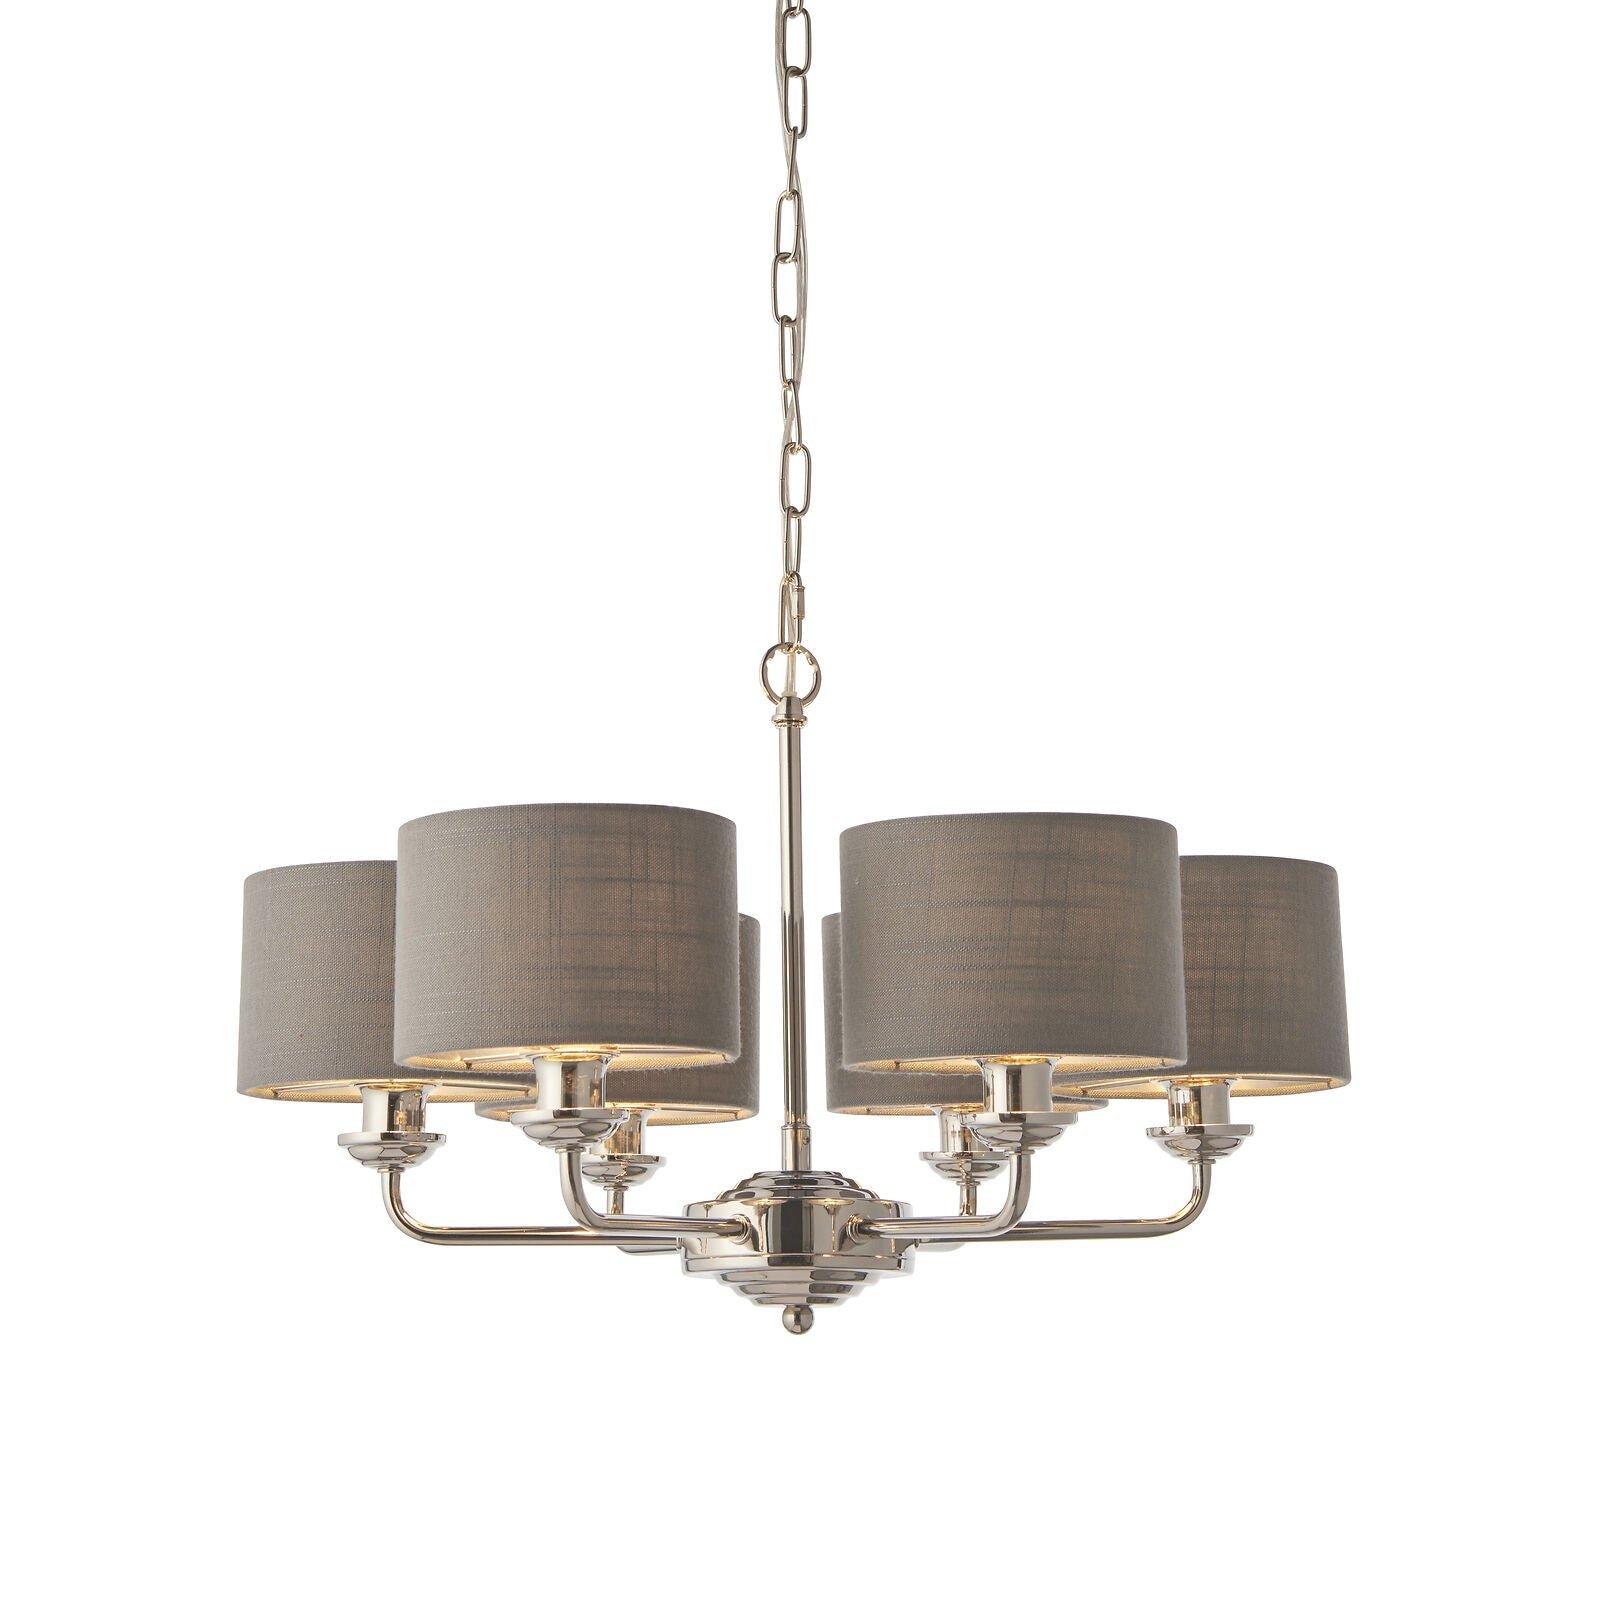 Ceiling Pendant Light - Bright Nickel Plate & Charcoal Fabric - 6 x 28W E14